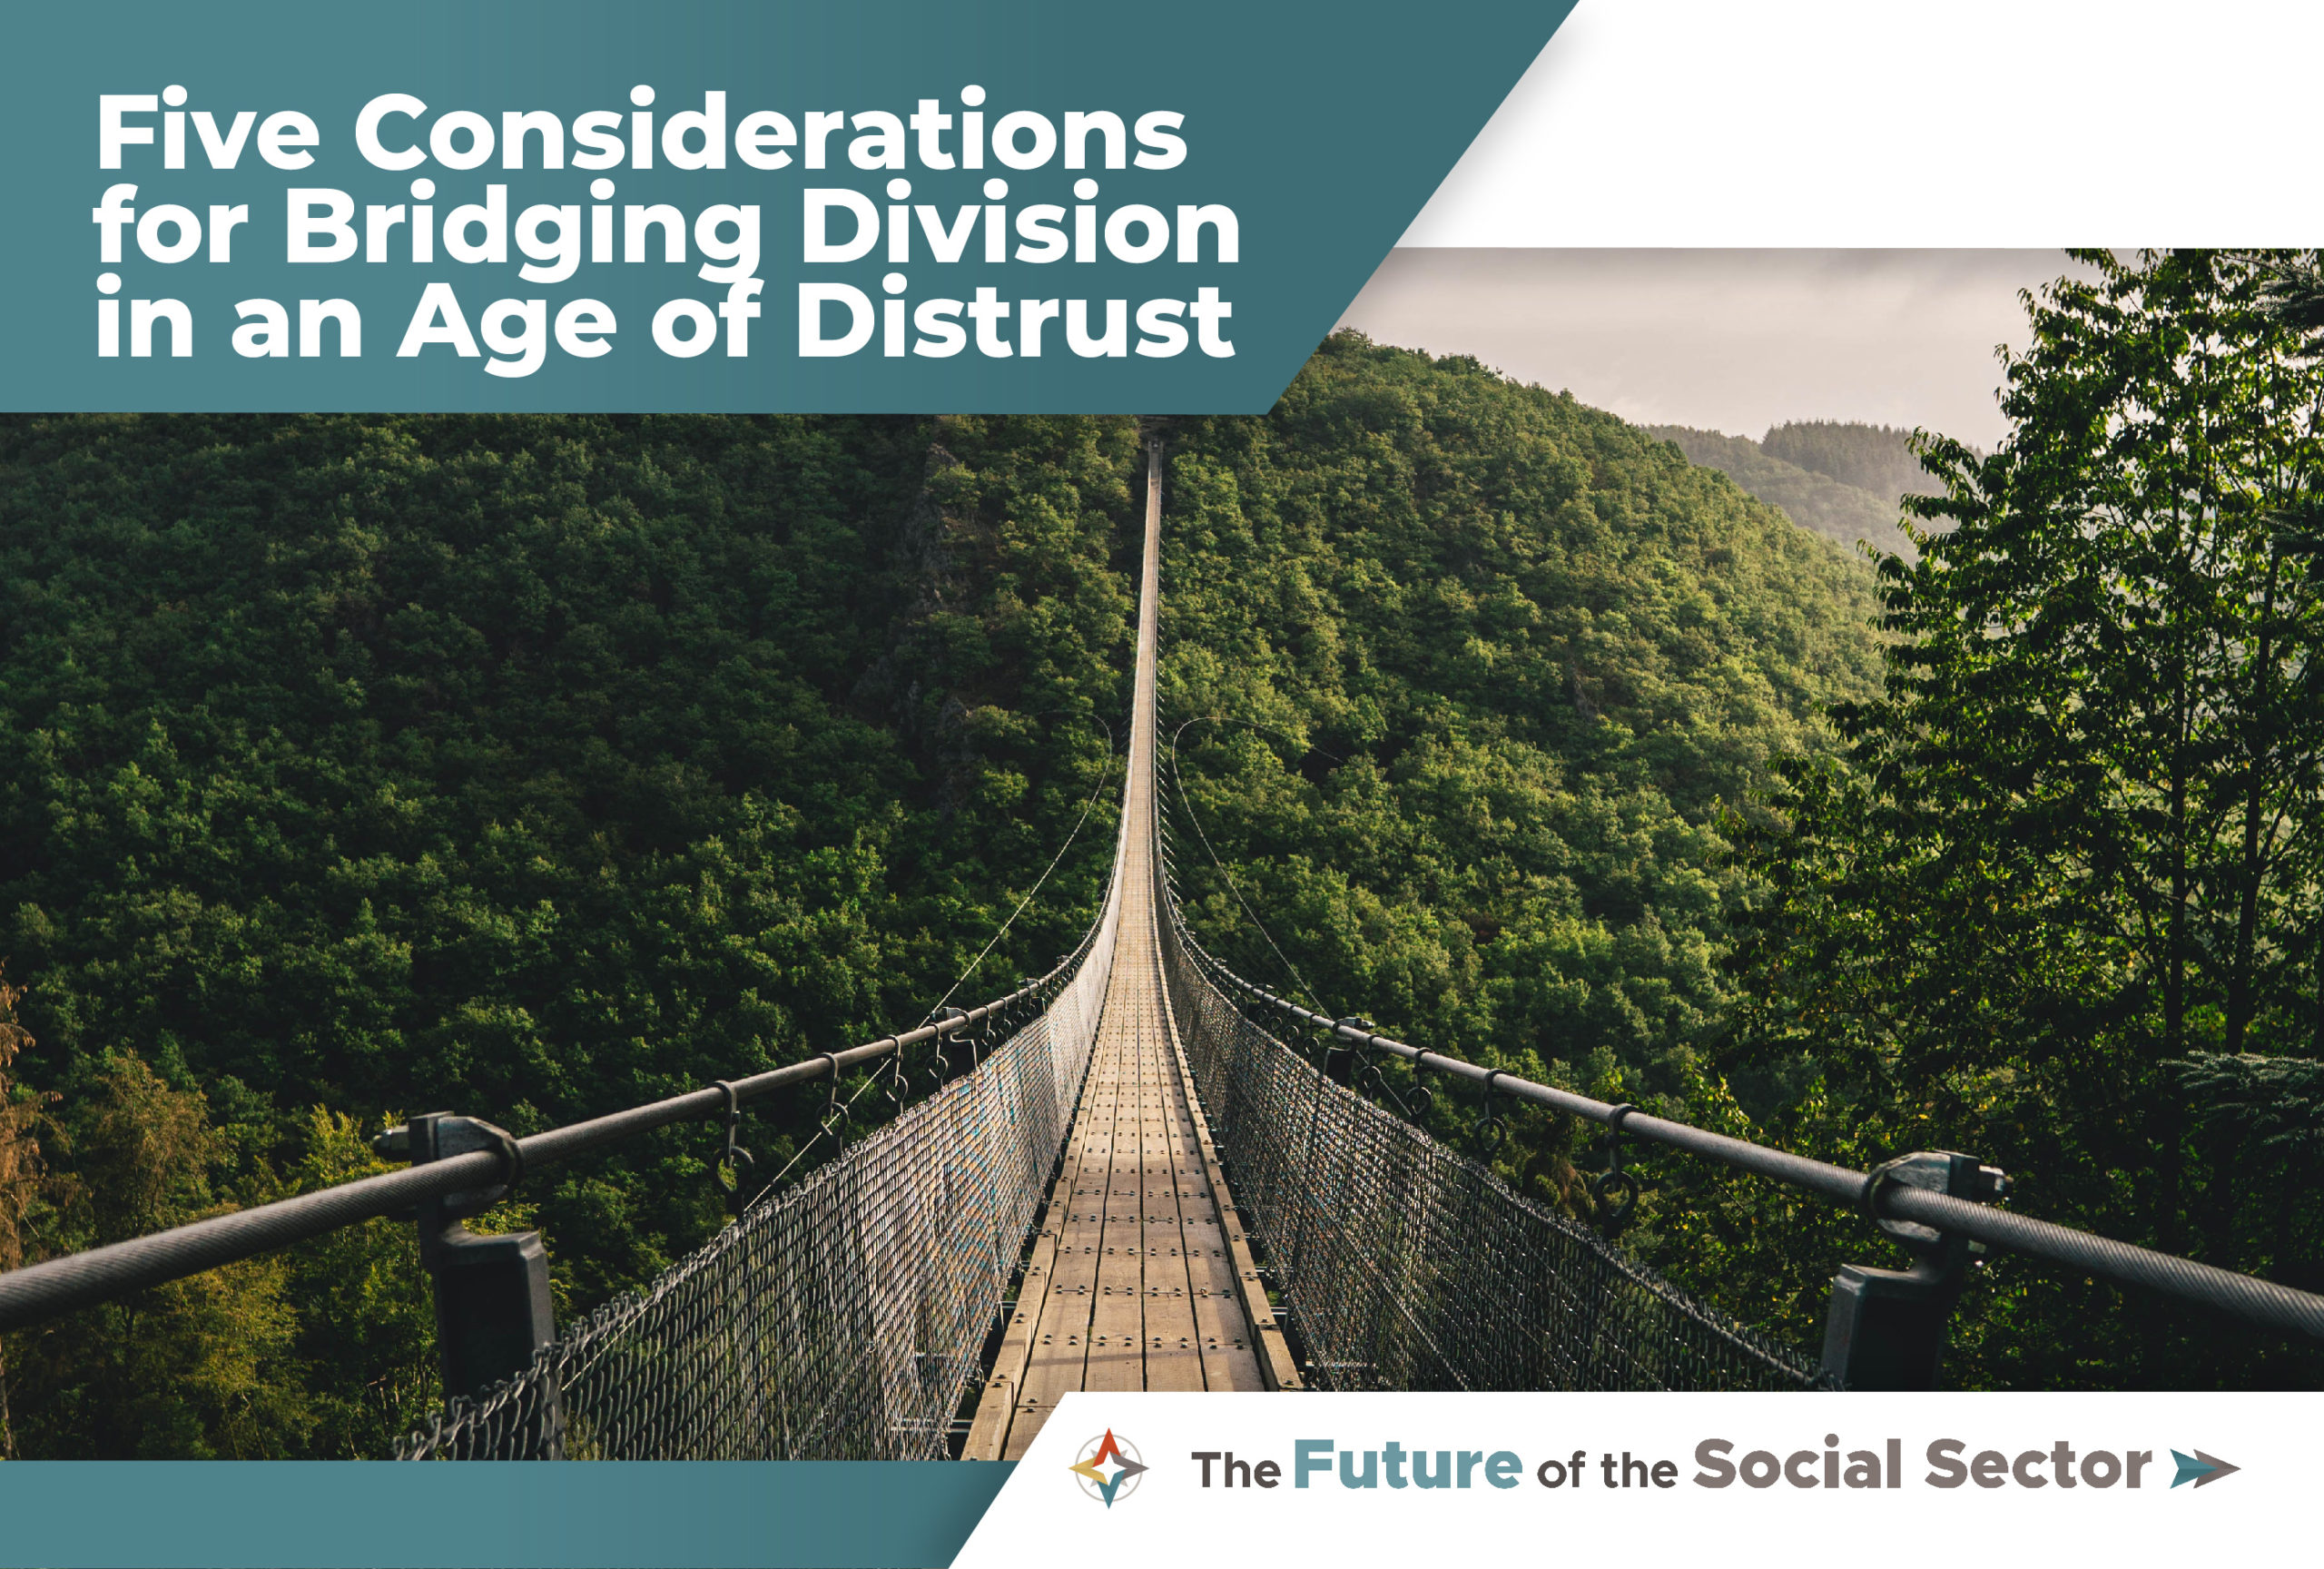 Five Considerations for Bridging Division in an Age of Distrust